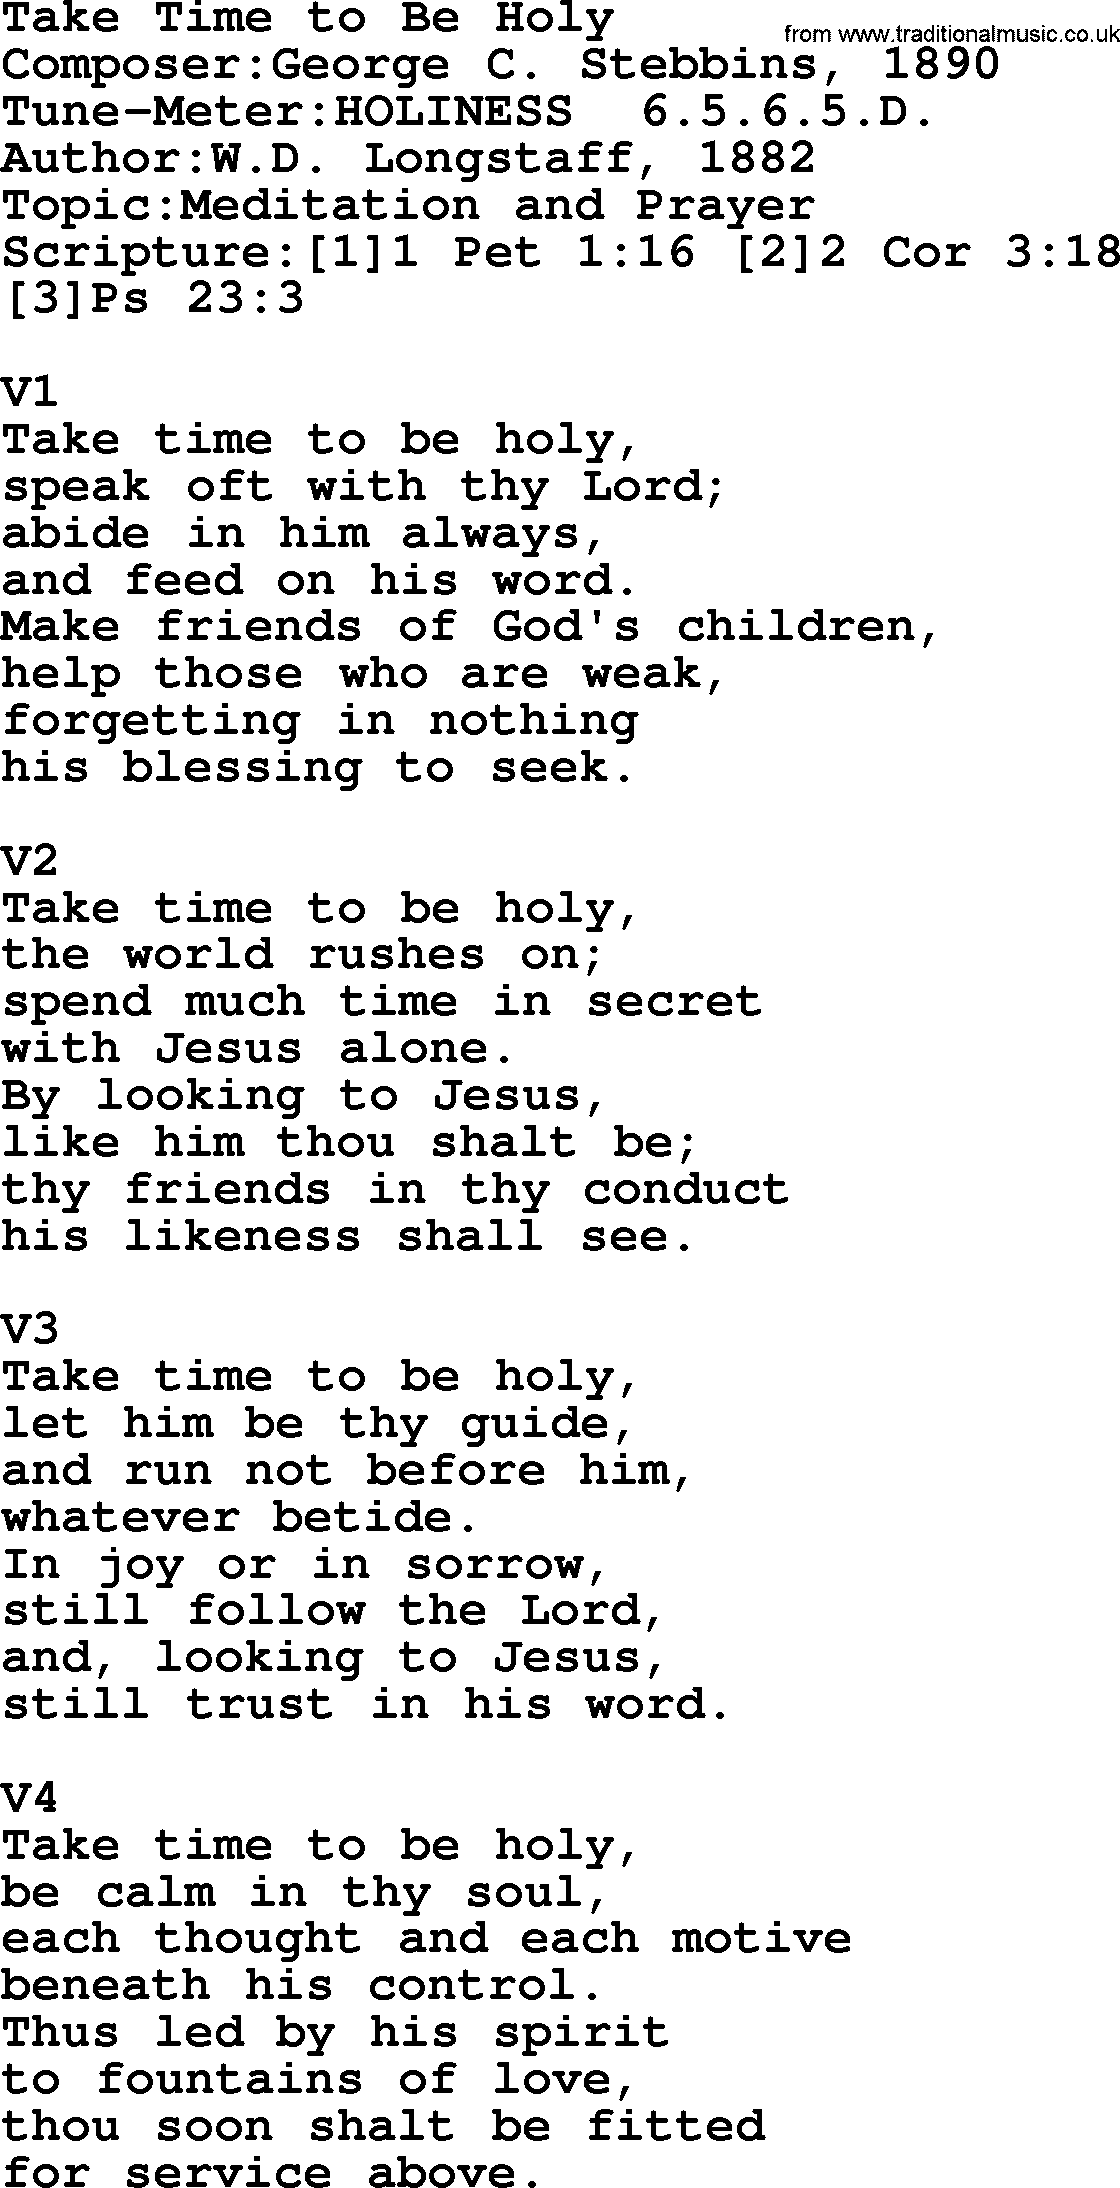 Adventist Hynms collection, Hymn: Take Time To Be Holy, lyrics with PDF